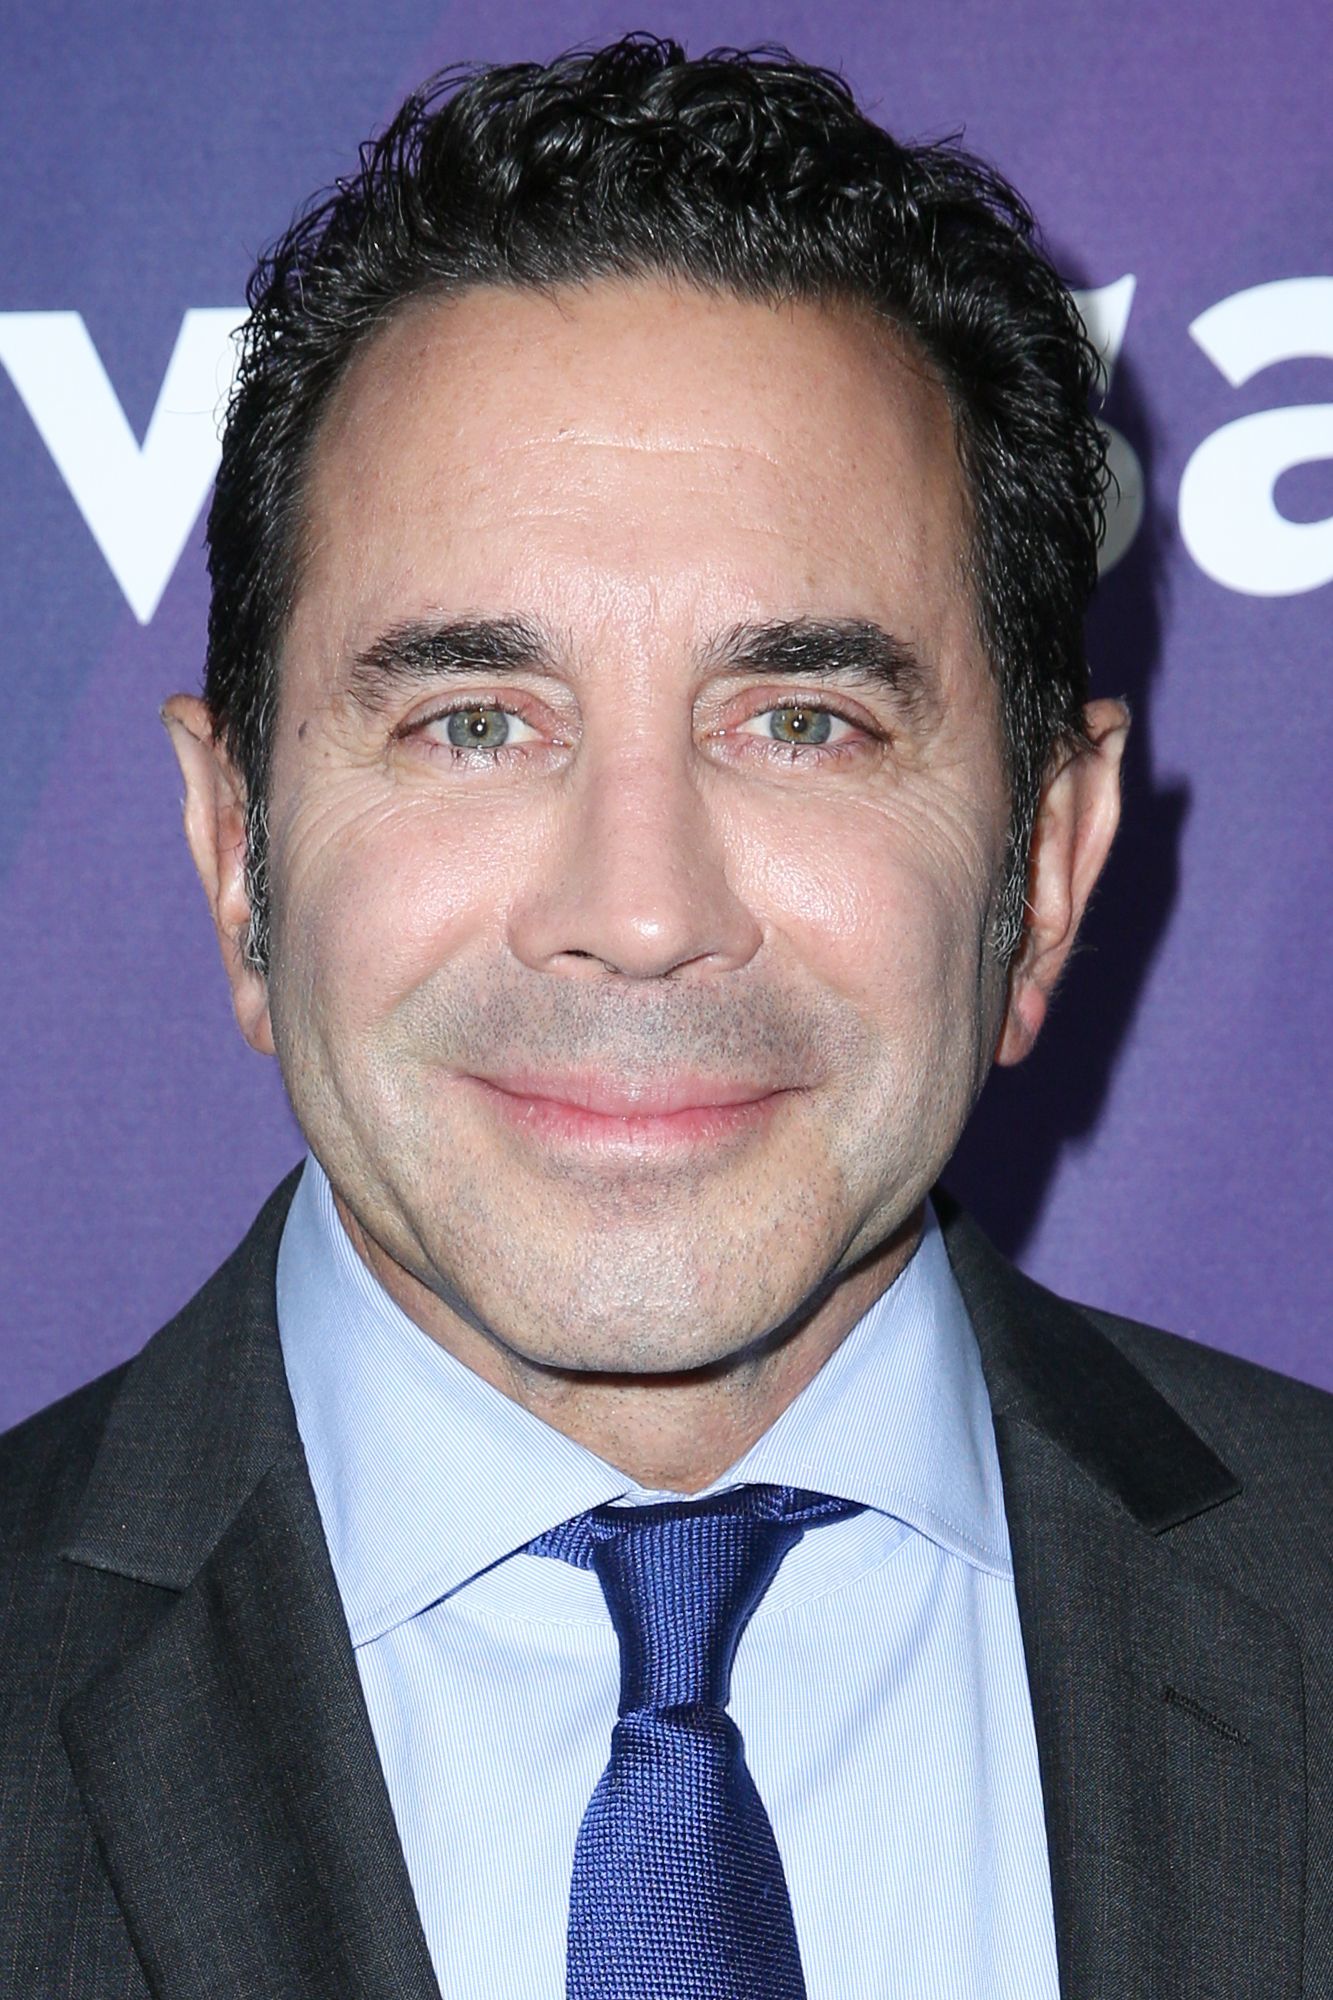 <p>Thanks to his profession, "Botched" star Dr. Paul Nassif is quite familiar with people getting work done. But when it comes to the plastic surgeon altering his own looks, he's sure to be subtle about the changes he makes...</p>